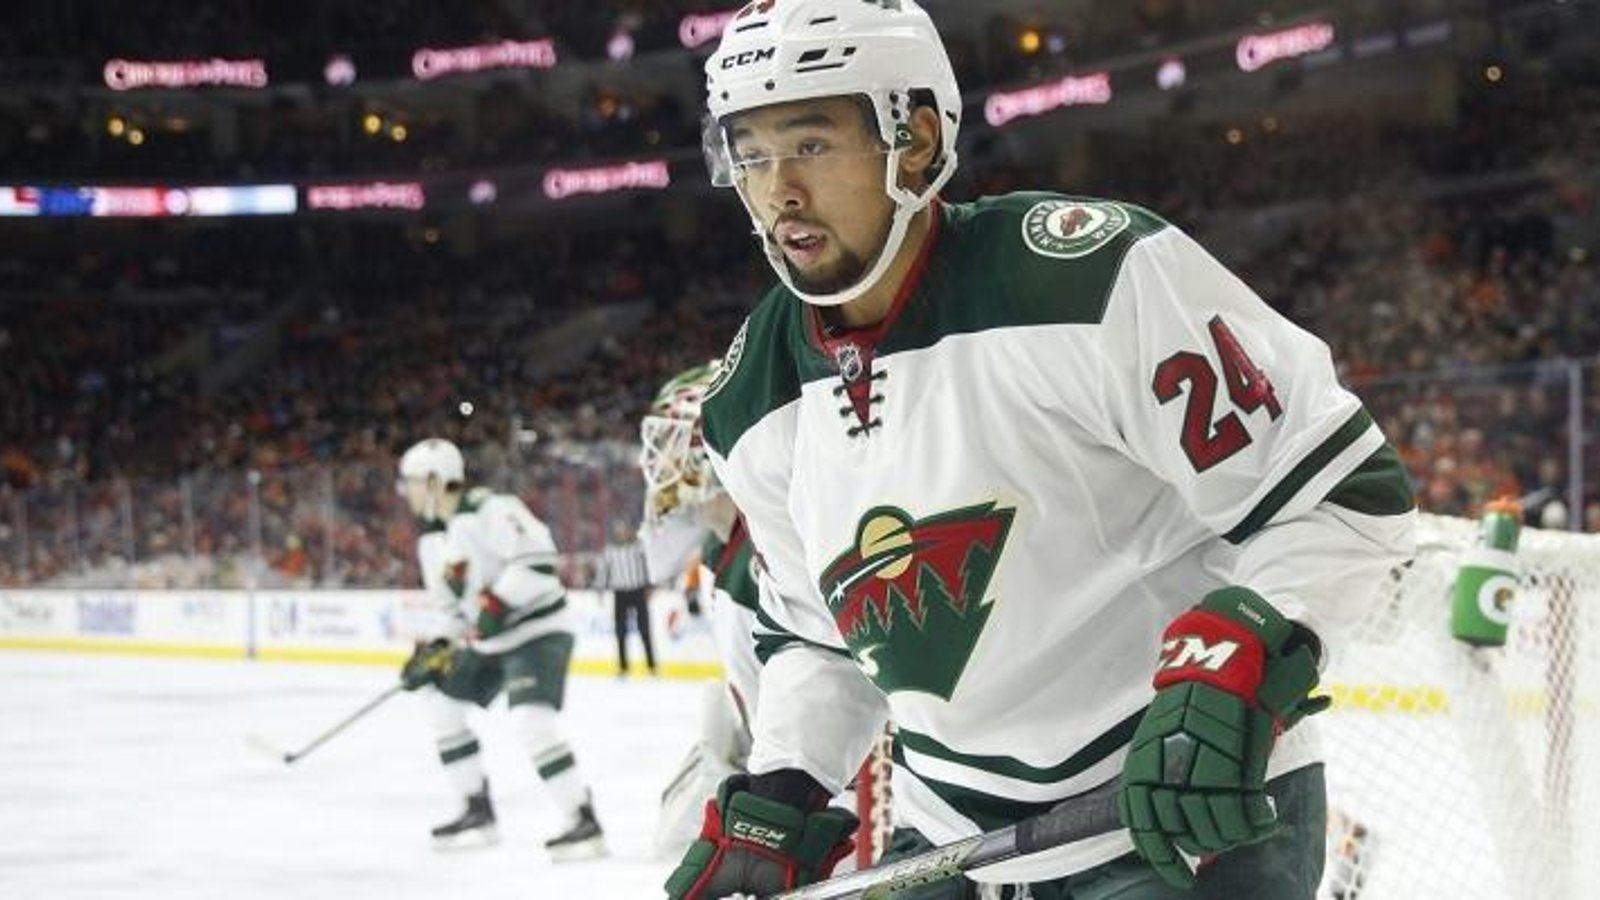 Wild scratch two defenseman ahead of must-win game, and they aren't happy.